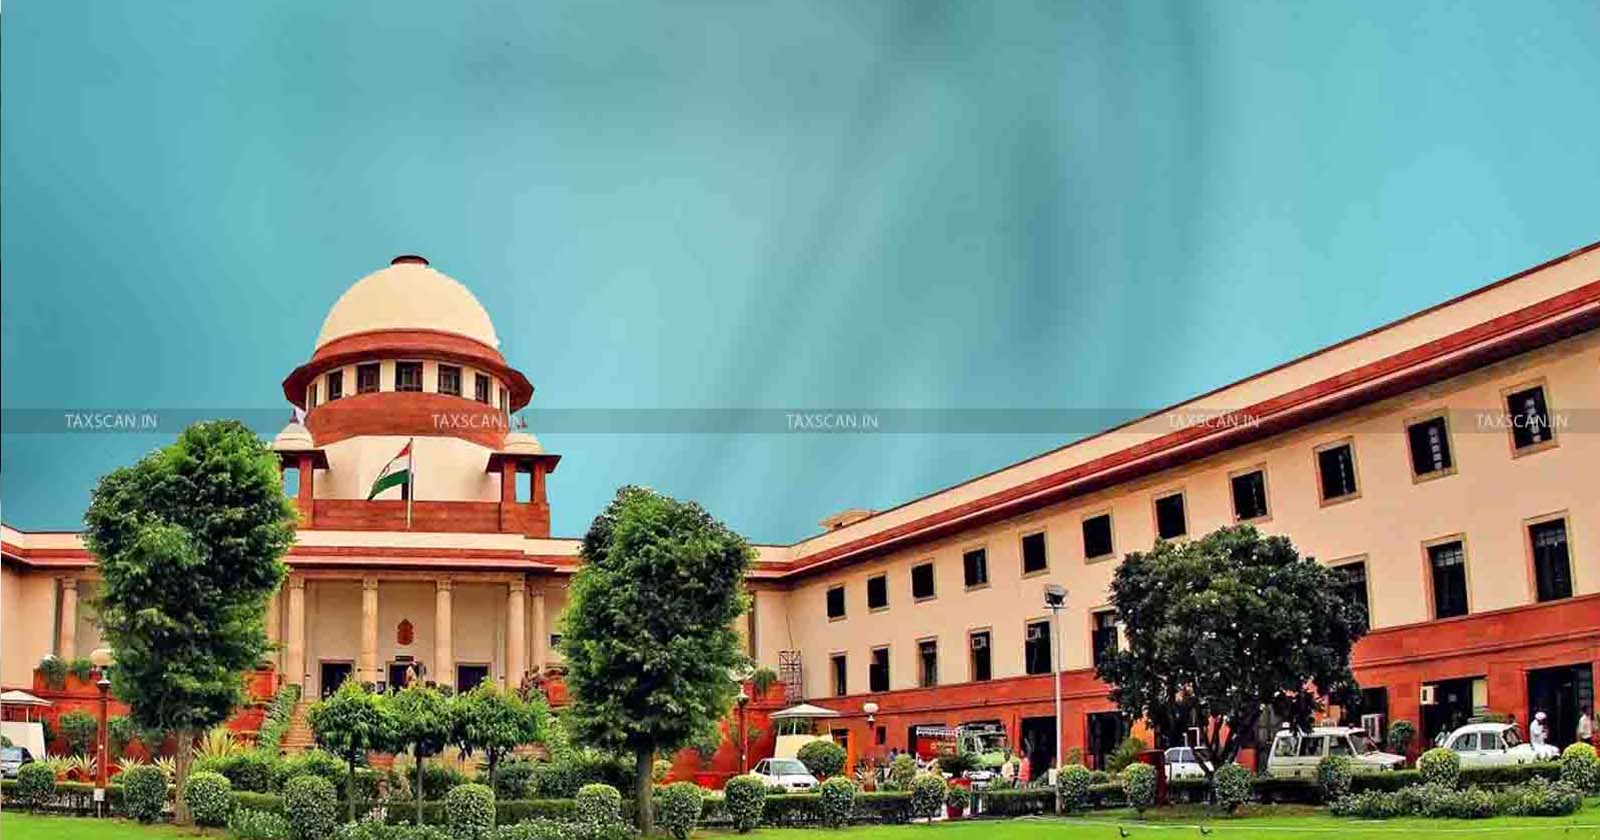 Supreme court - tax arrears - Supreme court on high court judgment - Special Leave Petition - Tax arrears declaration - Company tax arrears - Director tax liabilities - TAXSCAN